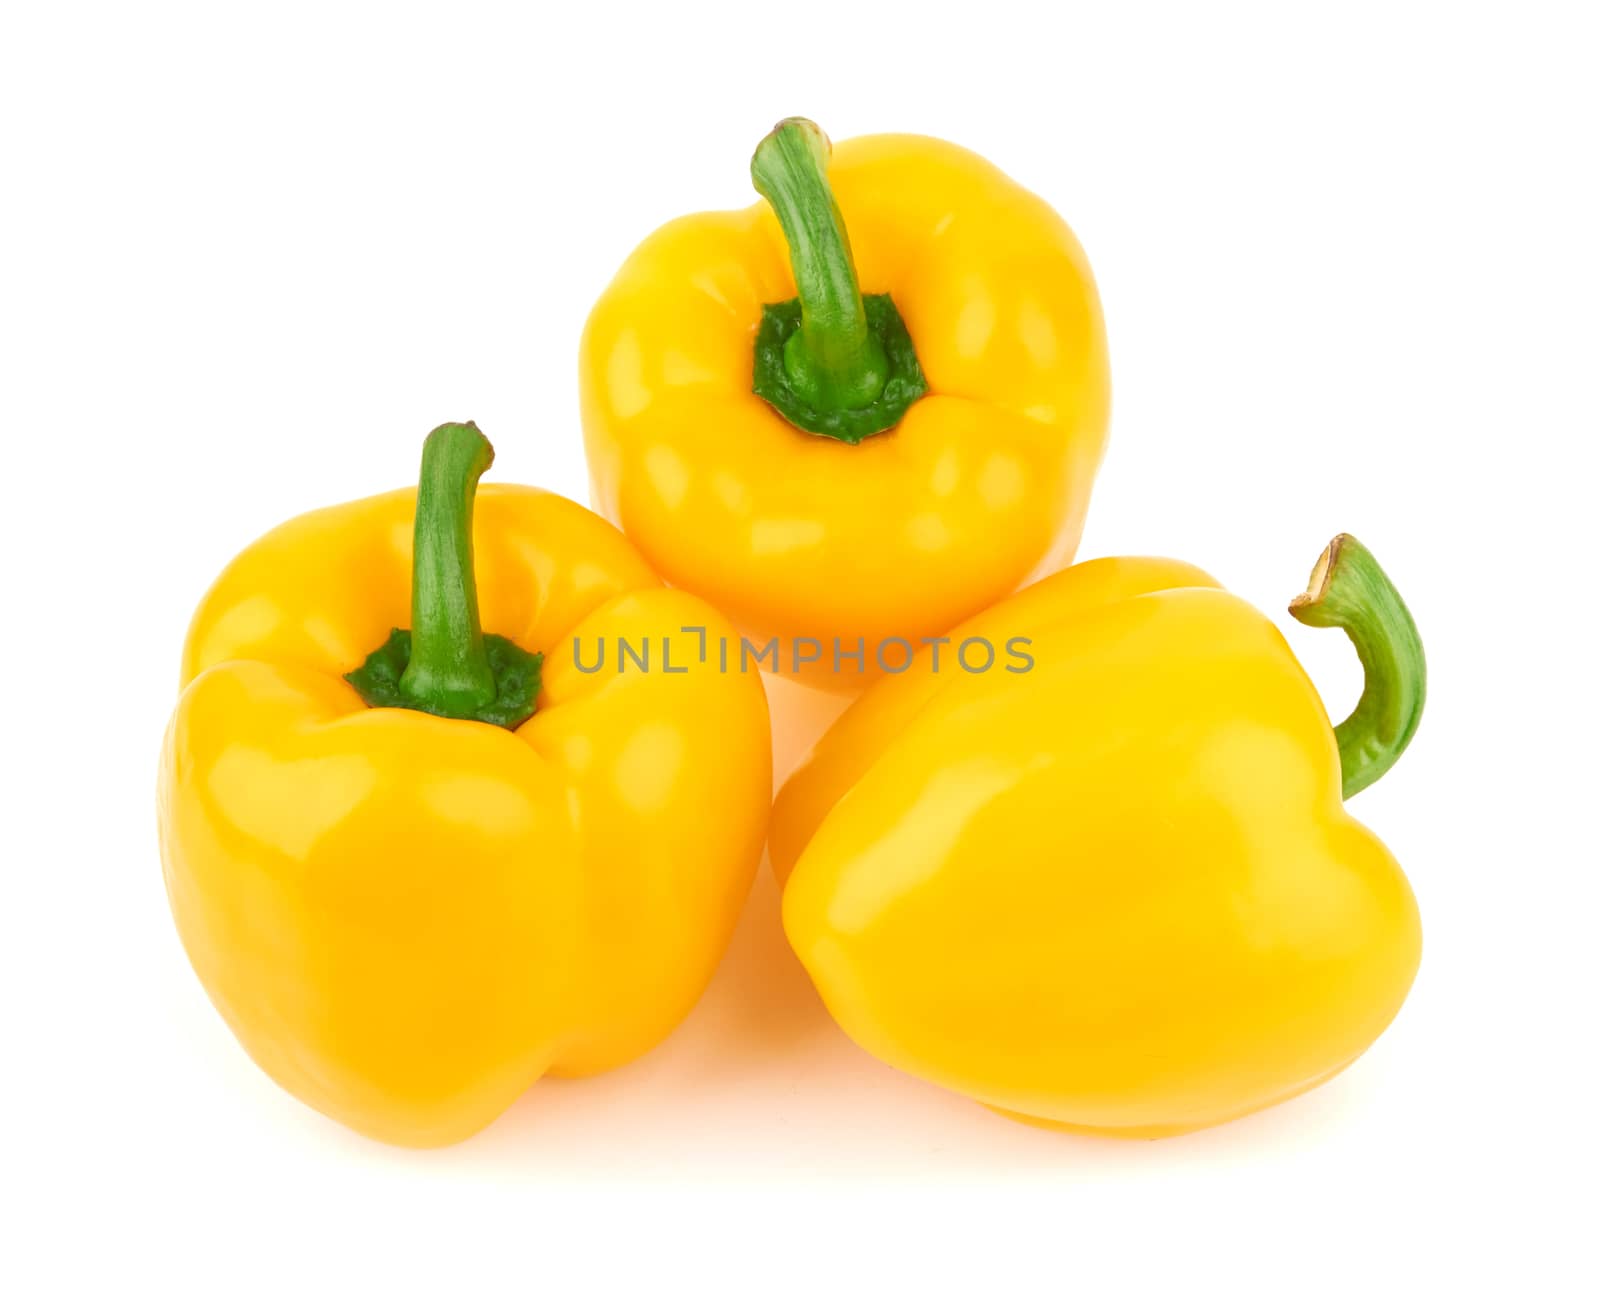 sweet peppers on white by pioneer111